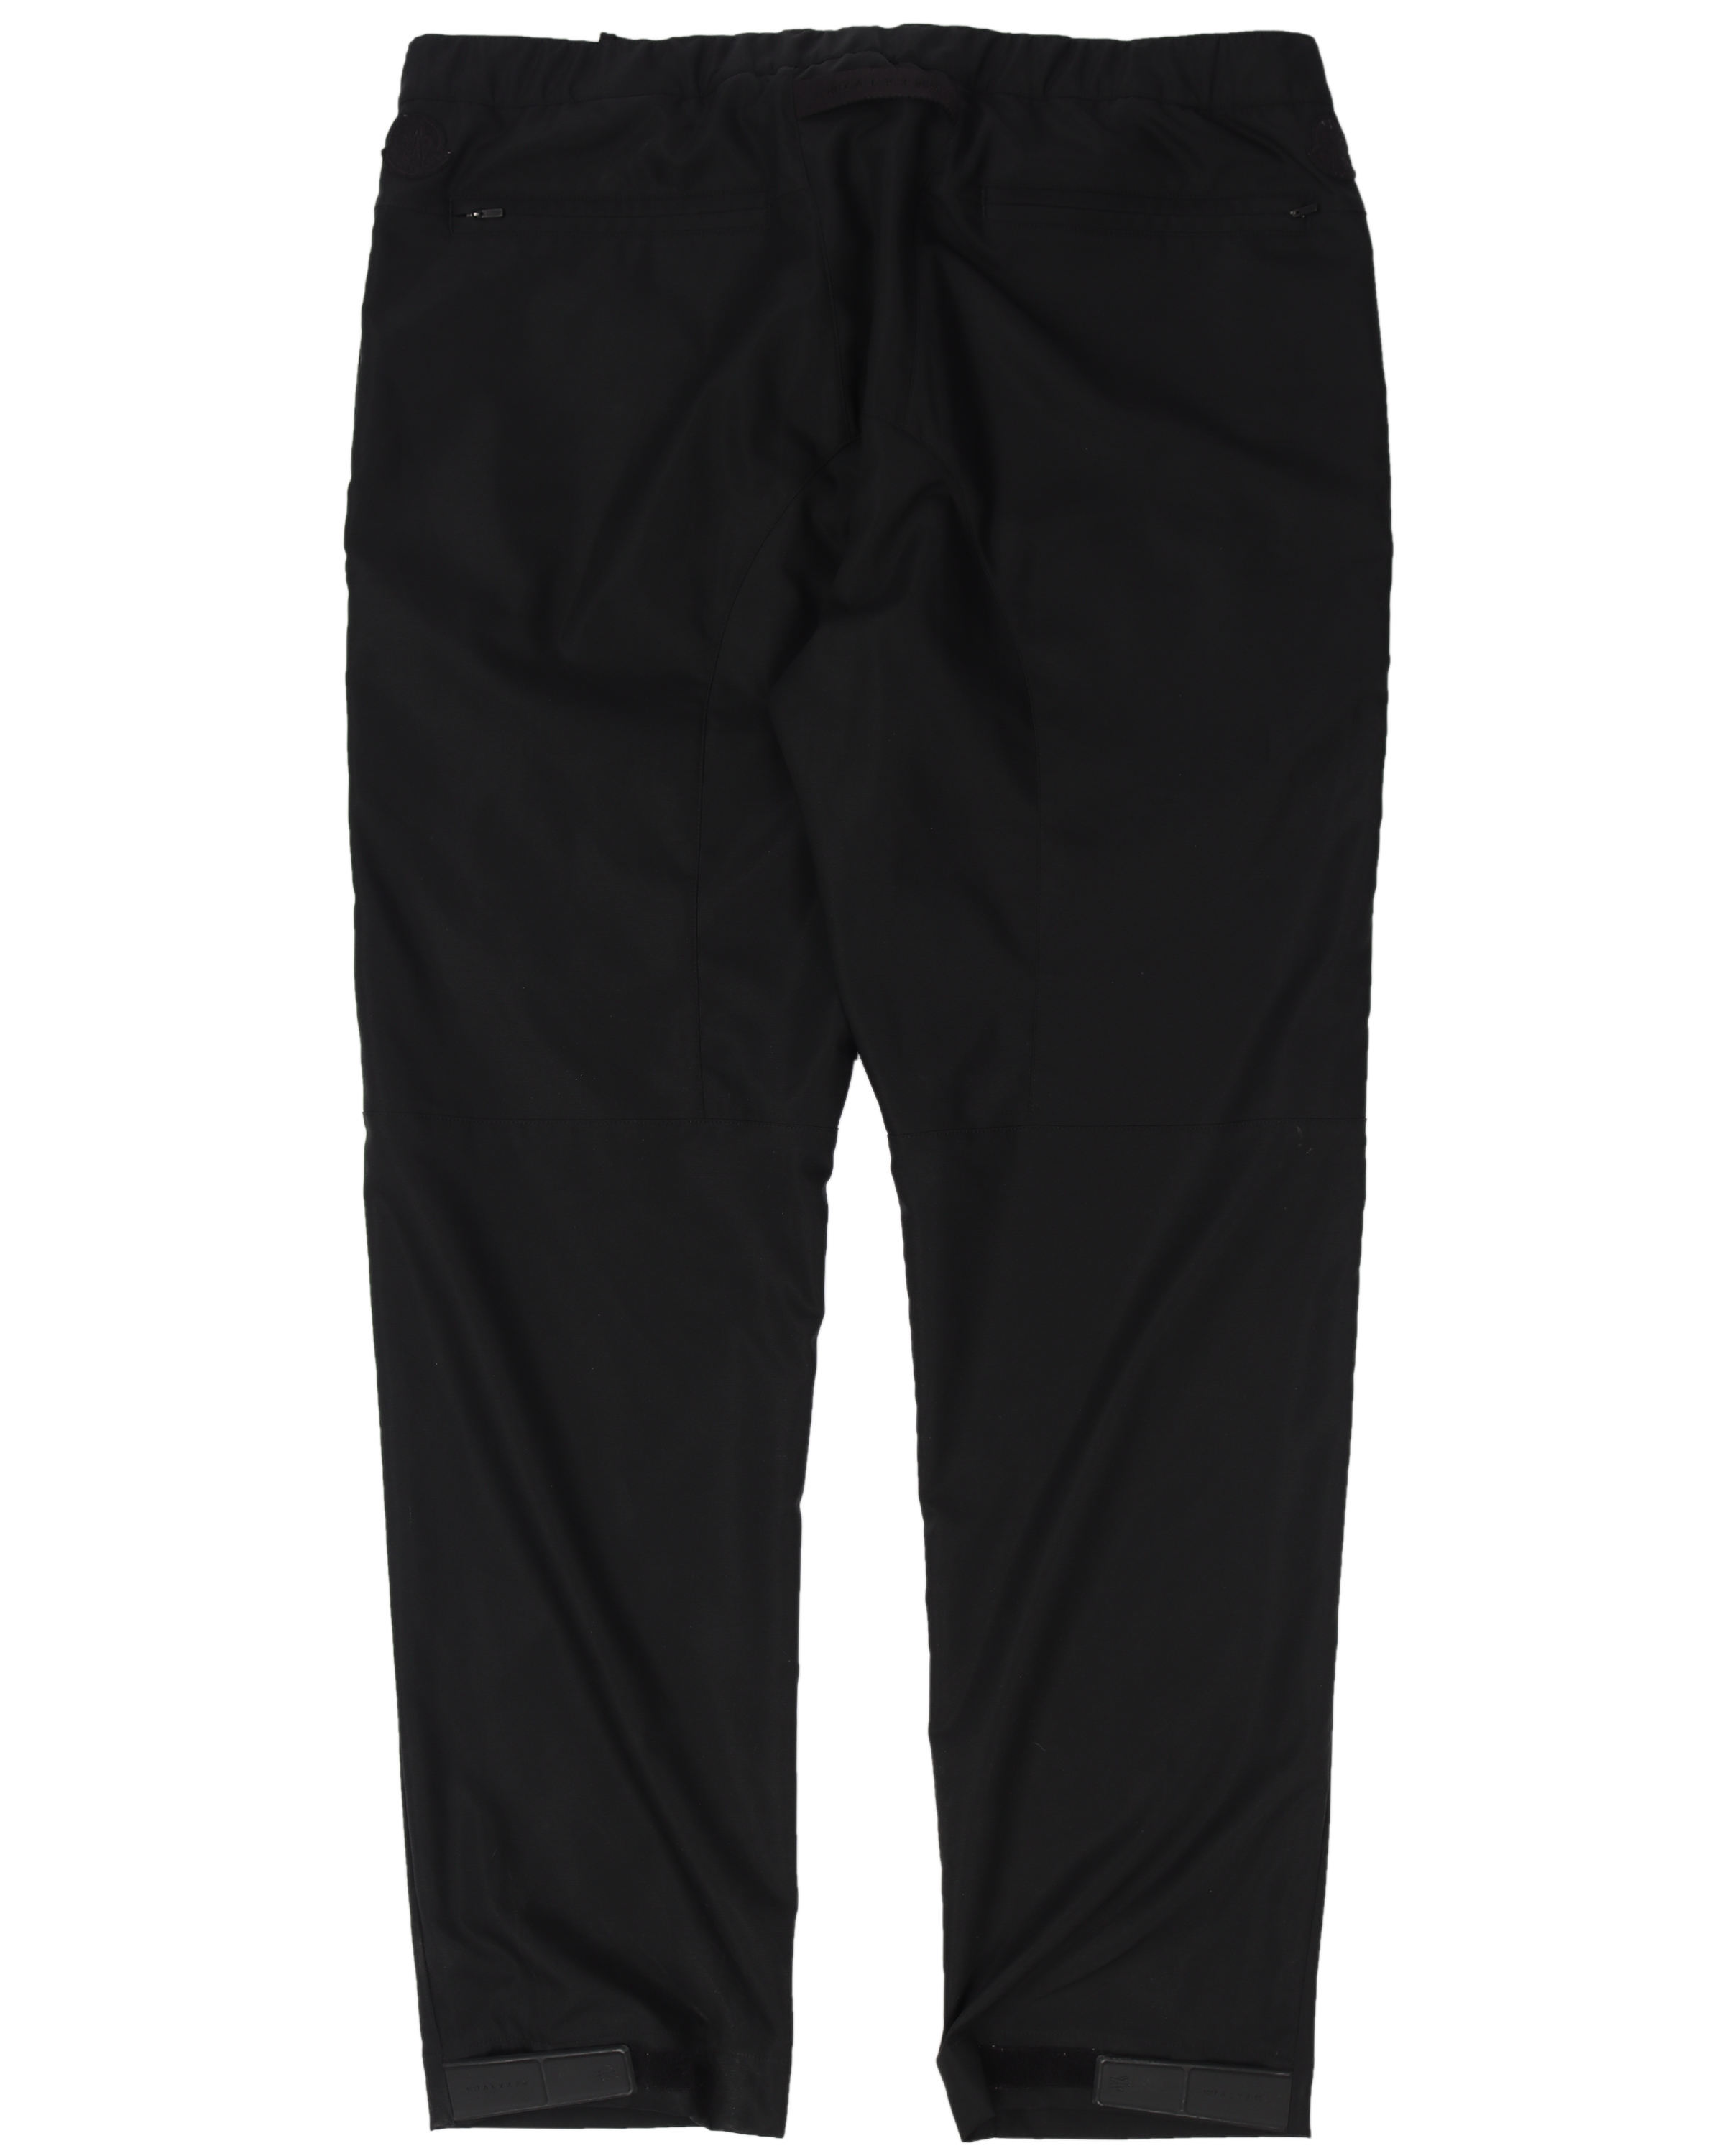 ALYX Belted Buckle Pants